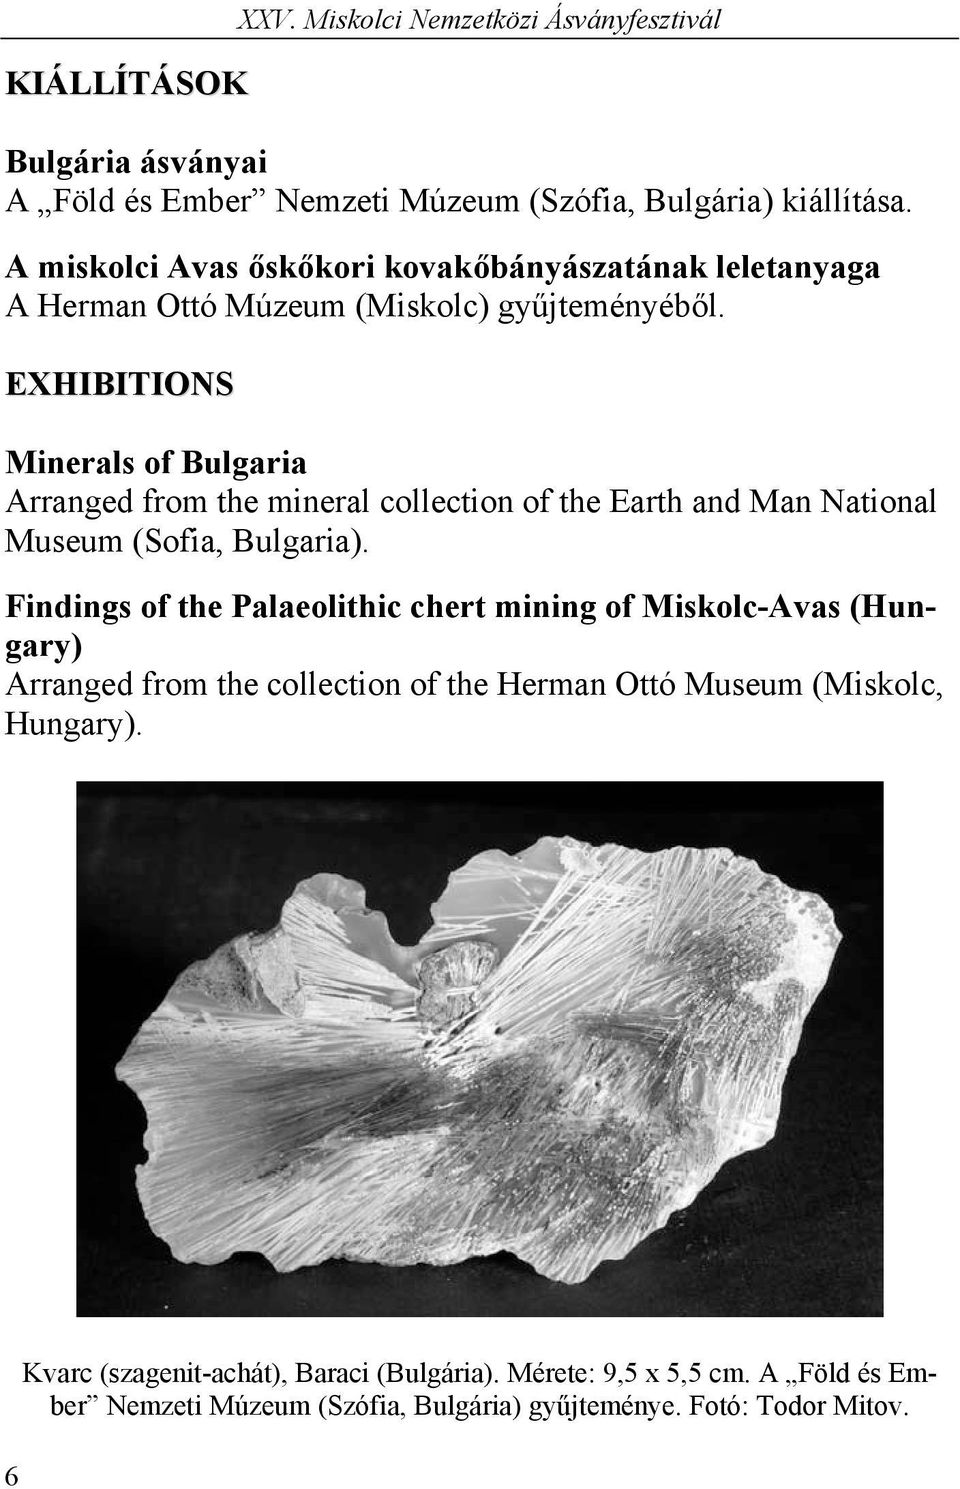 EXHIBITIONS Minerals of Bulgaria Arranged from the mineral collection of the Earth and Man National Museum (Sofia, Bulgaria).